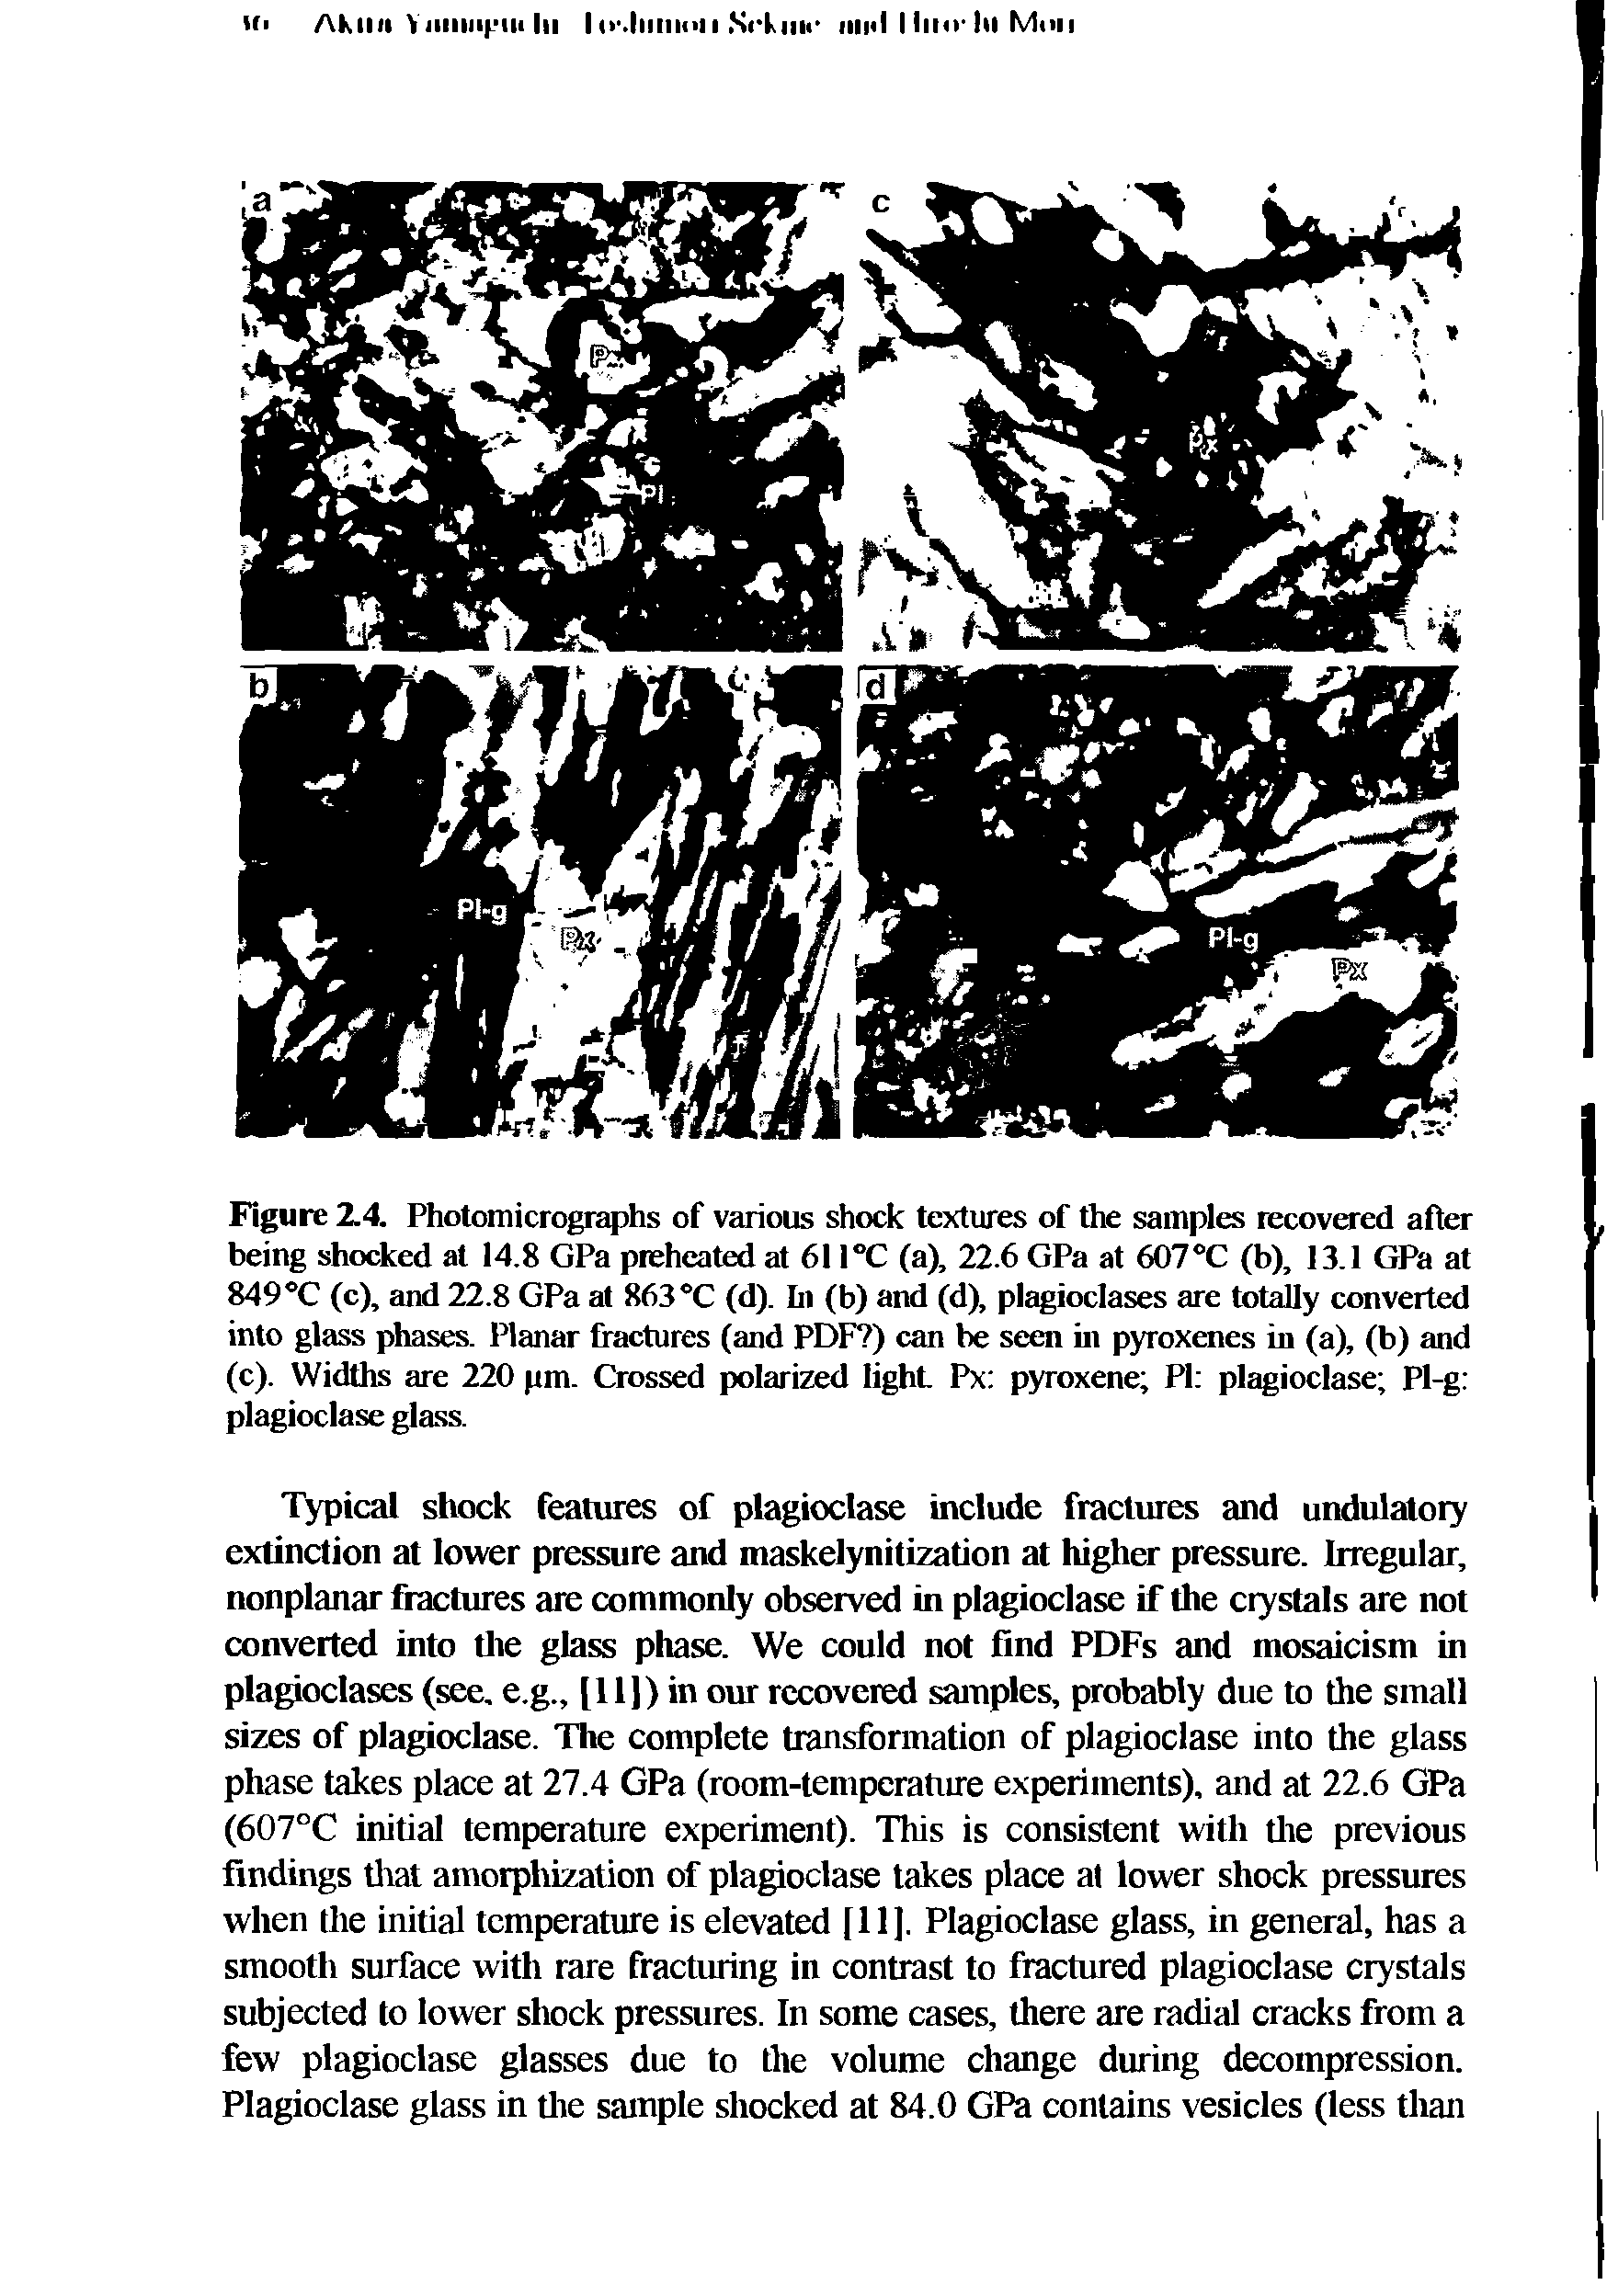 Figure 2.4. Photomicrographs of various shock textures of the samples recovered after being shocked at 14.8 GPa preheated at 611°C (a), 22.6 GPa at 607 C (b), 13.1 GPa at 849 C (c), and 22.8 GPa at 863 °C (d). hi (b) and (d), plagioclases are totally converted into glass phases. Planar fractures (and PDF ) can be seen in pyroxenes in (a), (b) and (c). Widths are 220 pm. Crossed polarized light Px pyroxene PI plagioclase Pl-g plagioclase glass.